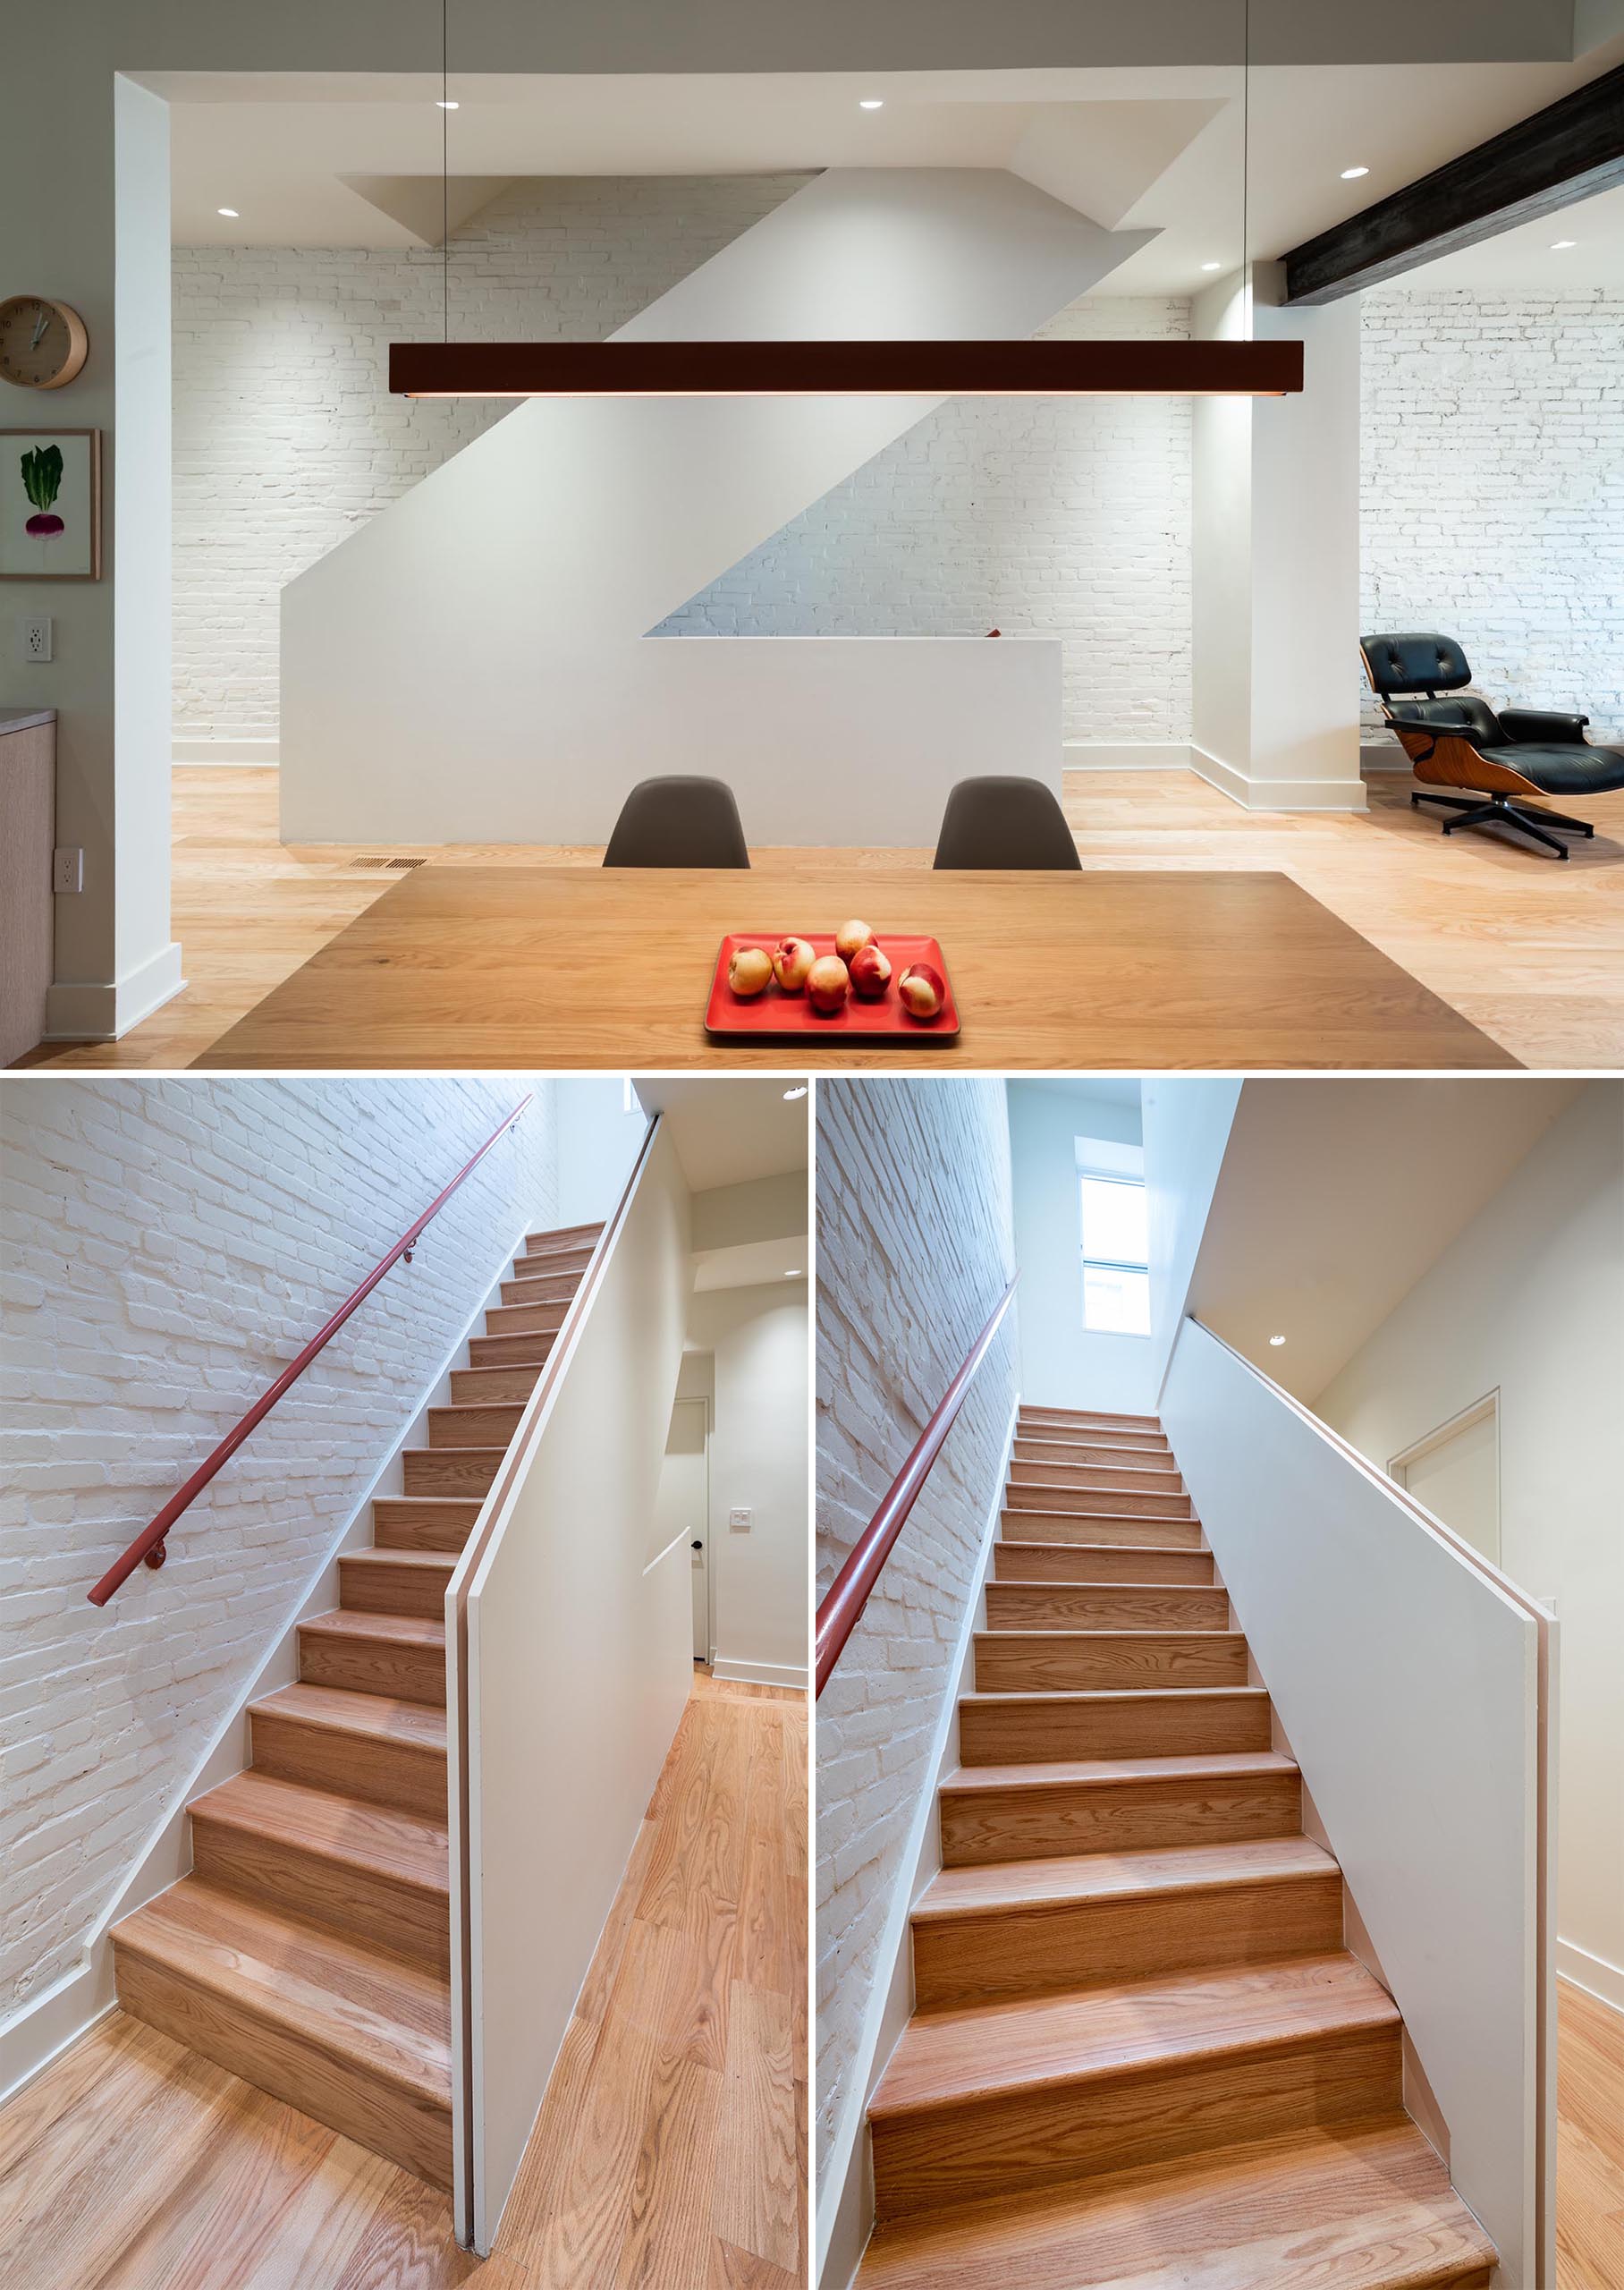 A modern remodeled staircase with a white painted brick wall backdrop.